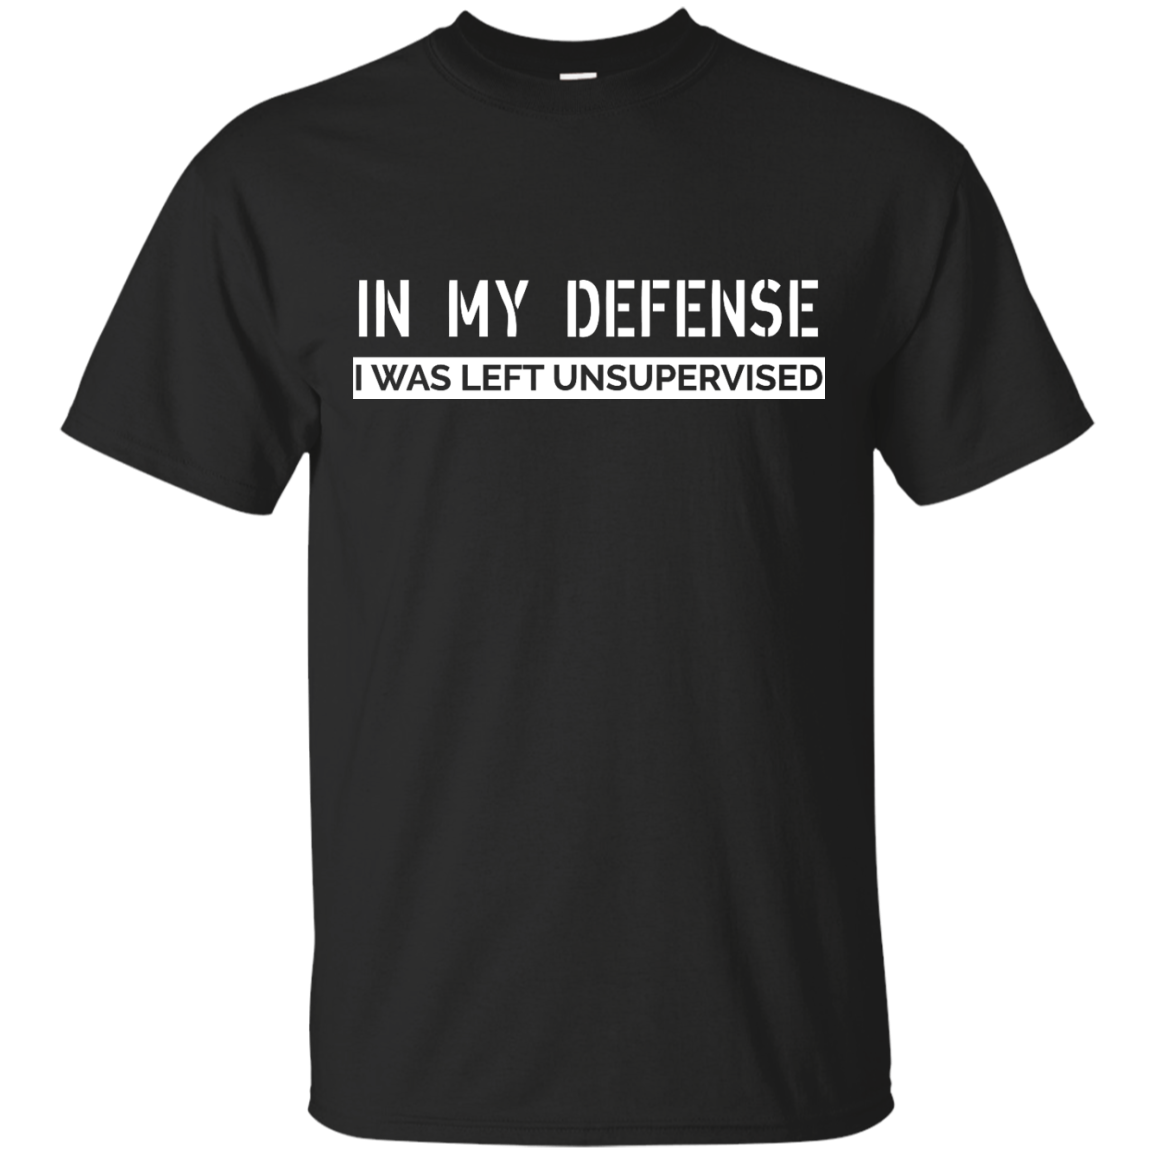 In My Defense, I Was Left Unsupervised shirt, sweater - iFrogTees